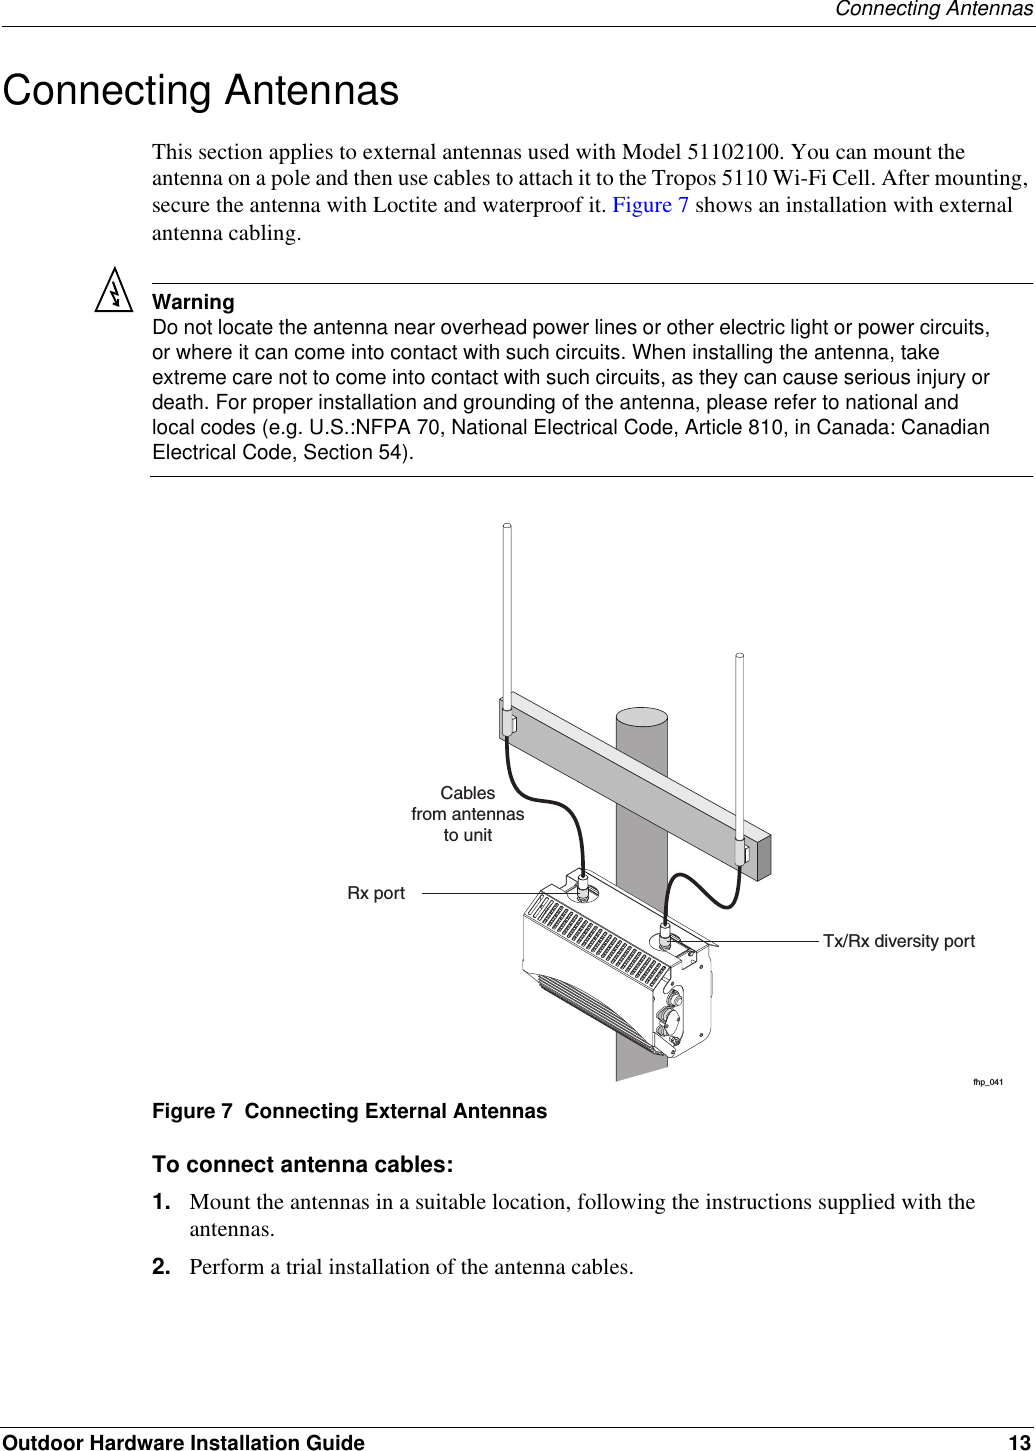 Connecting AntennasOutdoor Hardware Installation Guide 13Connecting AntennasThis section applies to external antennas used with Model 51102100. You can mount the antenna on a pole and then use cables to attach it to the Tropos 5110 Wi-Fi Cell. After mounting, secure the antenna with Loctite and waterproof it. Figure 7 shows an installation with external antenna cabling.WarningDo not locate the antenna near overhead power lines or other electric light or power circuits, or where it can come into contact with such circuits. When installing the antenna, take extreme care not to come into contact with such circuits, as they can cause serious injury or death. For proper installation and grounding of the antenna, please refer to national and local codes (e.g. U.S.:NFPA 70, National Electrical Code, Article 810, in Canada: Canadian Electrical Code, Section 54).Figure 7  Connecting External AntennasTo connect antenna cables:1. Mount the antennas in a suitable location, following the instructions supplied with the antennas.2. Perform a trial installation of the antenna cables.fhp_041Tx/Rx diversity portCablesfrom antennasto unitRx port